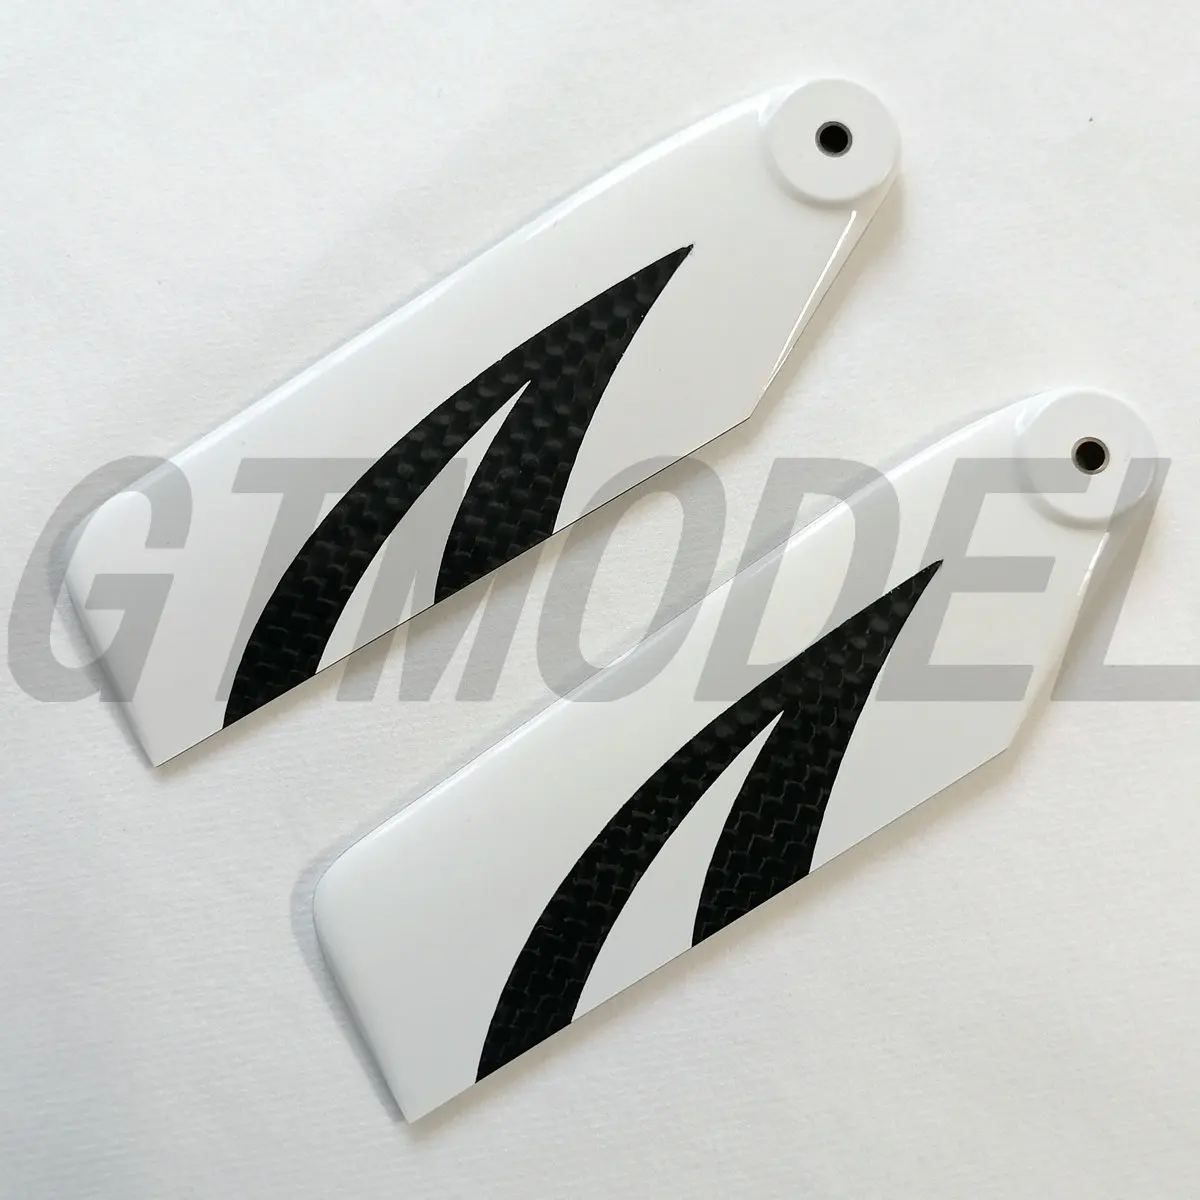 Game Fun Play Toys 1 Pair &quot;Facon&quot; 95MM Carbon Fiber Tail Rotor Blade For... - $47.00